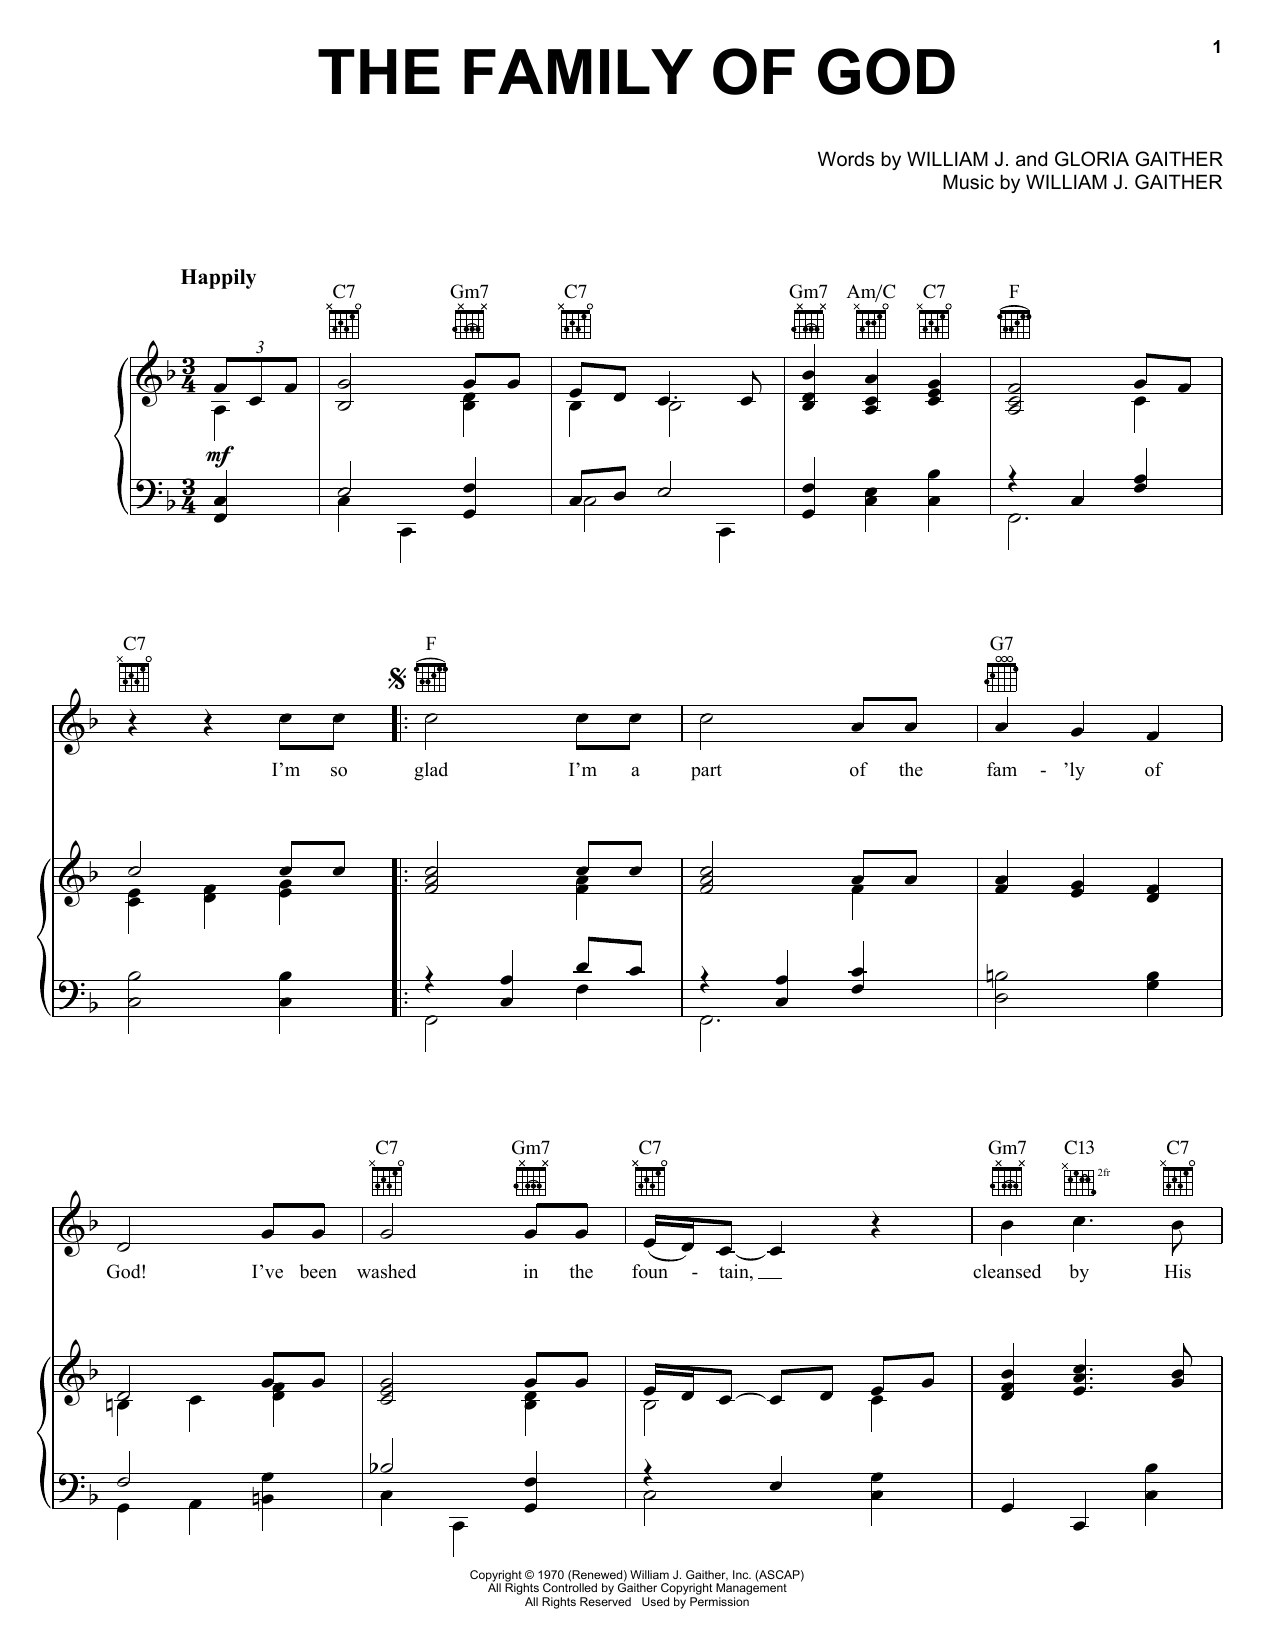 Download Bill & Gloria Gaither The Family Of God Sheet Music